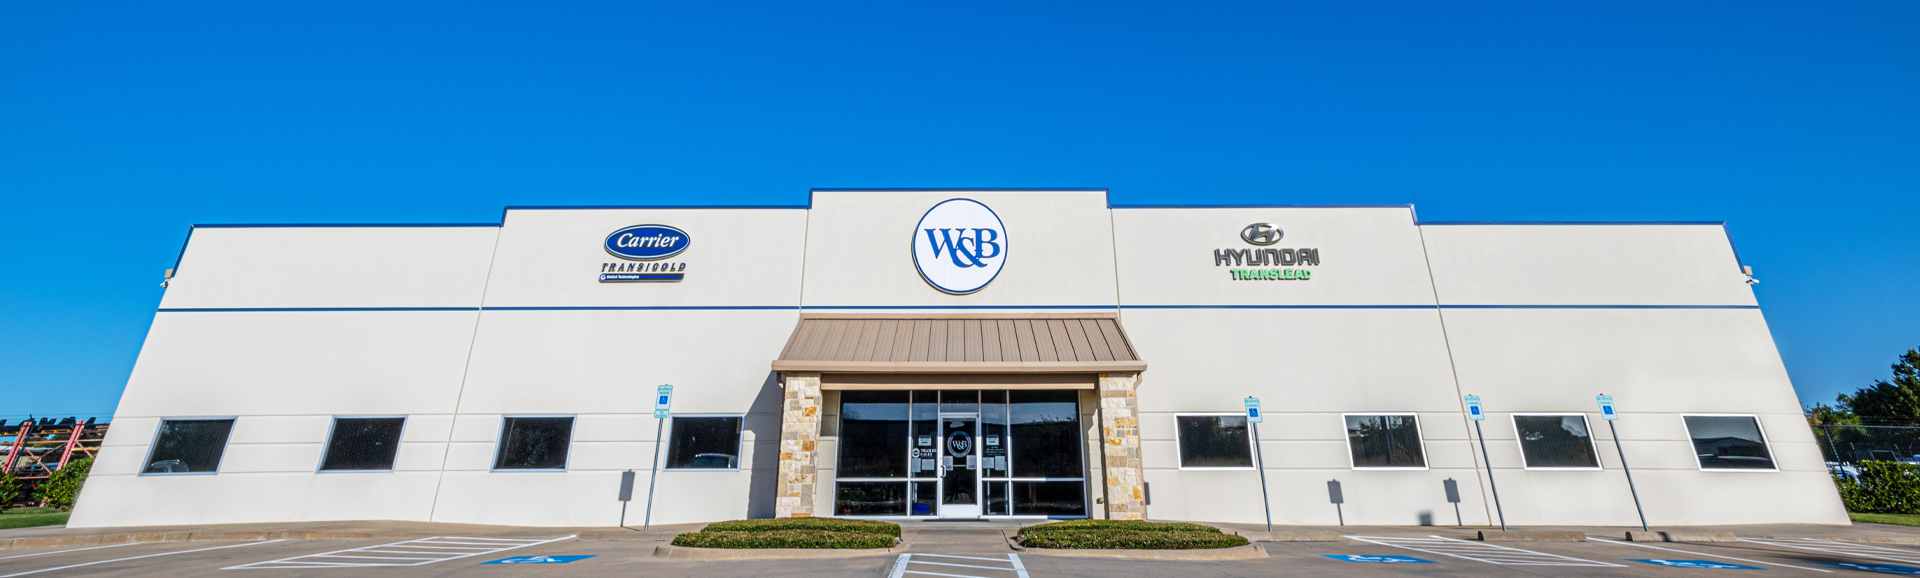 W&B Service Company Headquarters Carrier Transicold and Hyundai Translead for sale in W & B Service Company, Duncanville, Texas